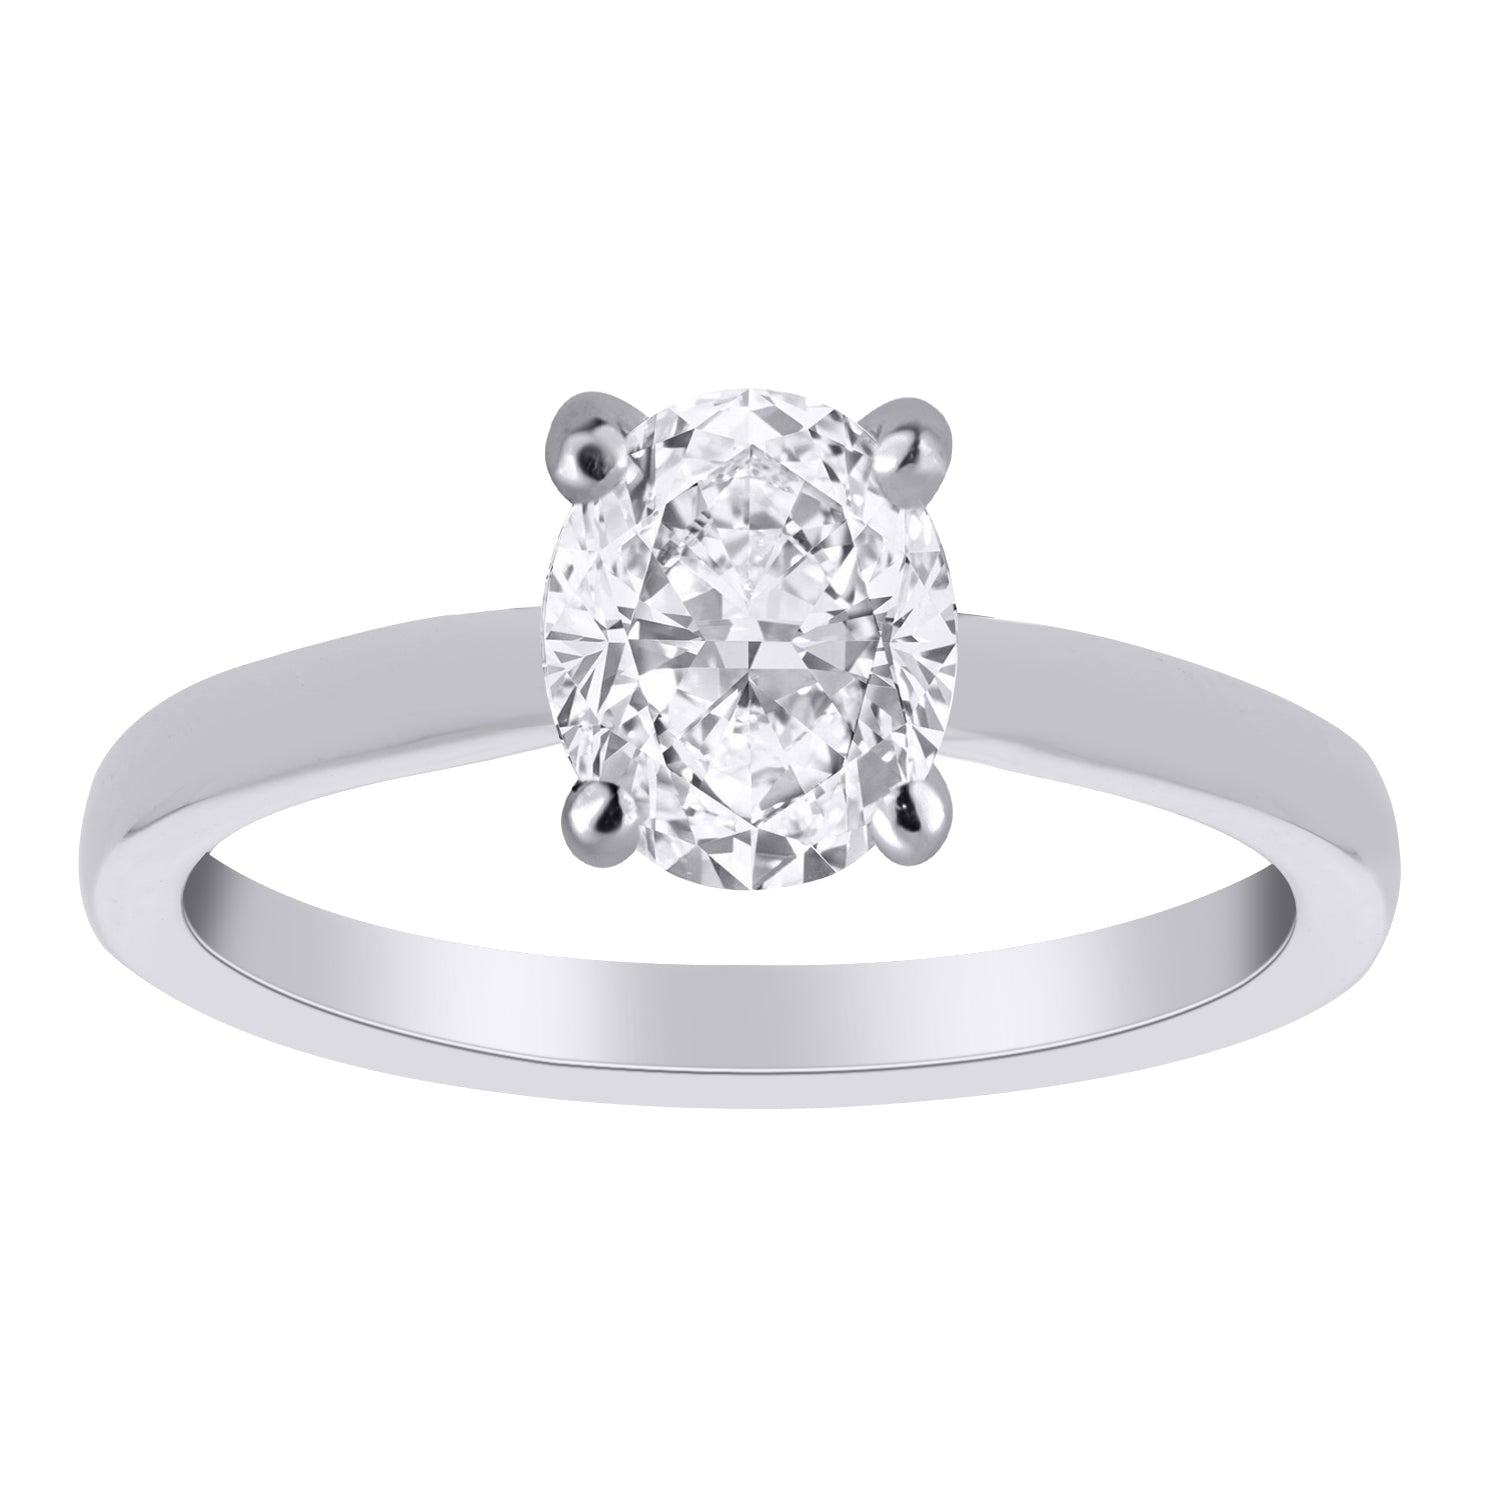 14K 1.00 CT LAB GROWN DIAMOND OVAL SOLITAIRE ENGAGEMENT RING.